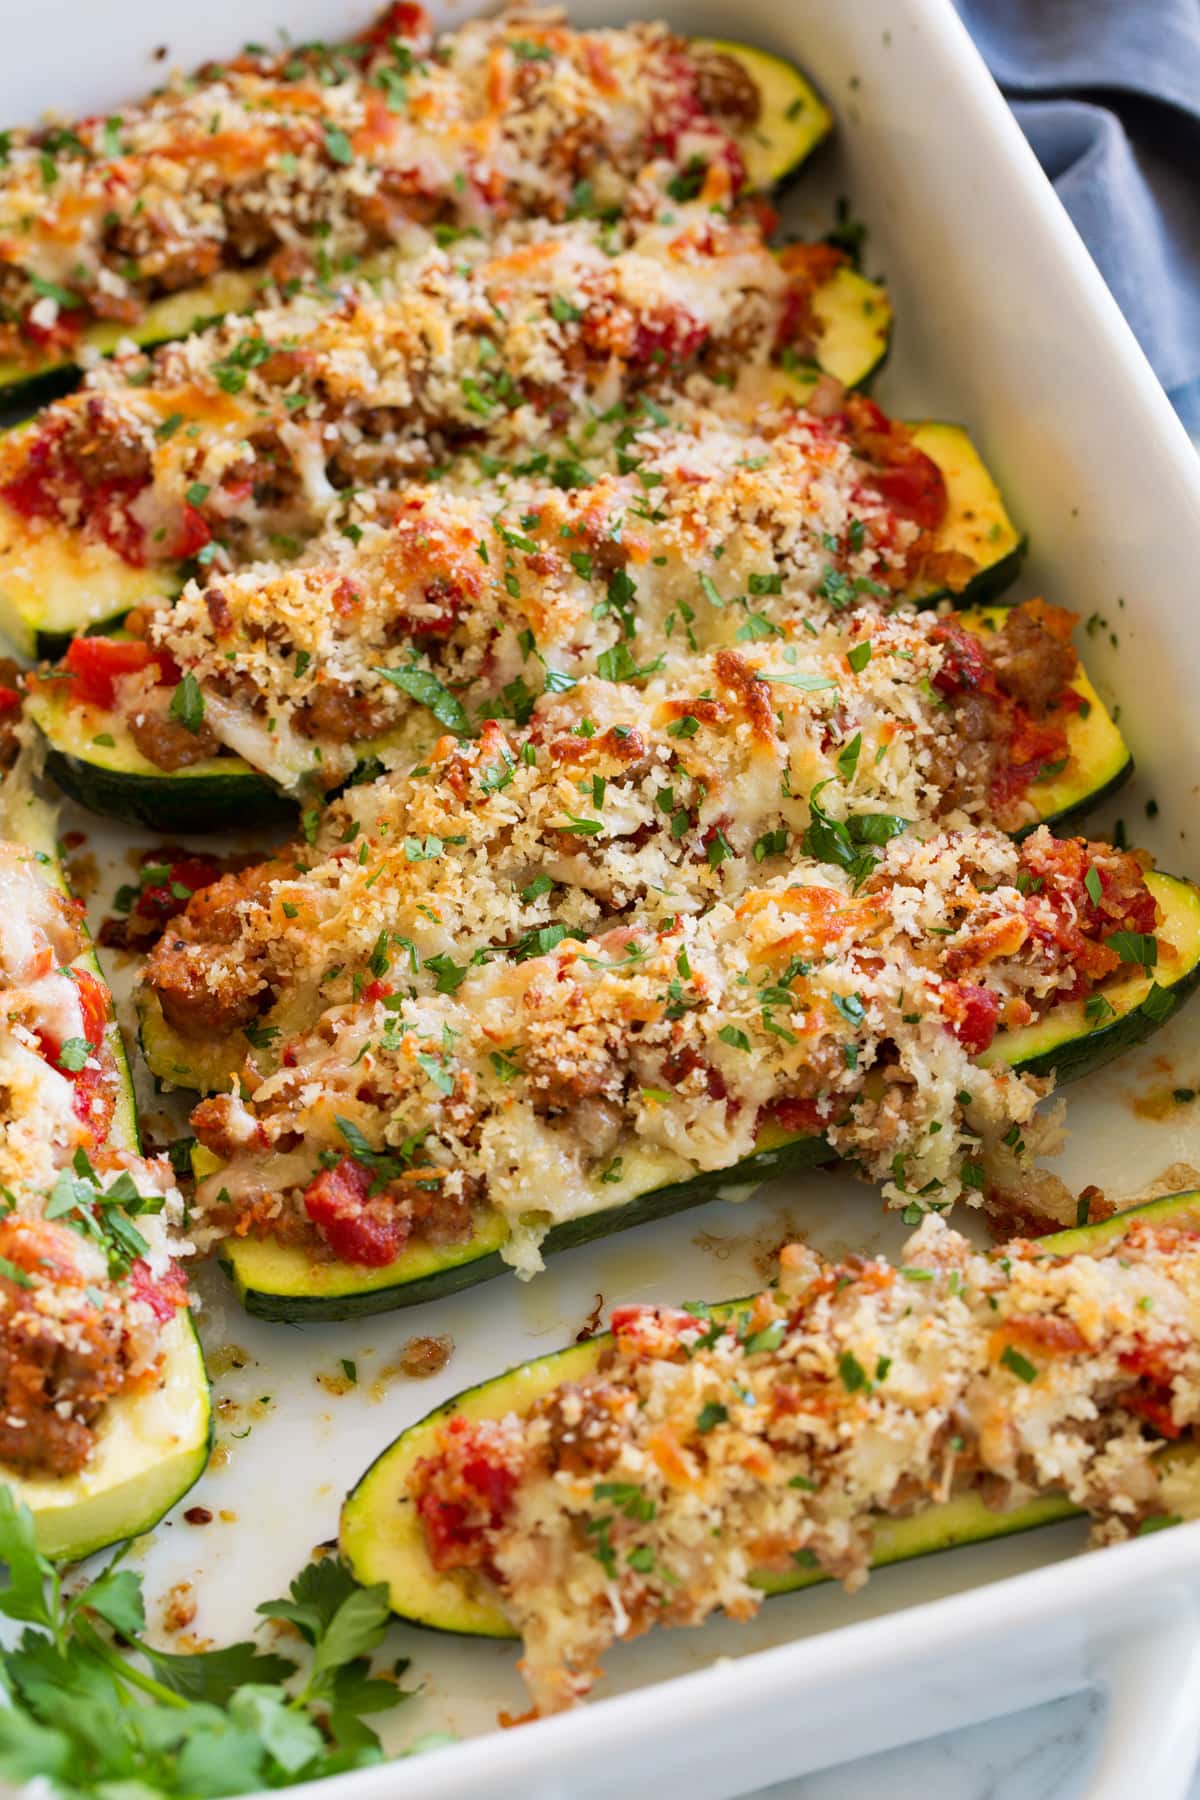 Image of zucchini boats stuffed with sausage, tomatoes, panko, and cheeses shown in a white baking dish.